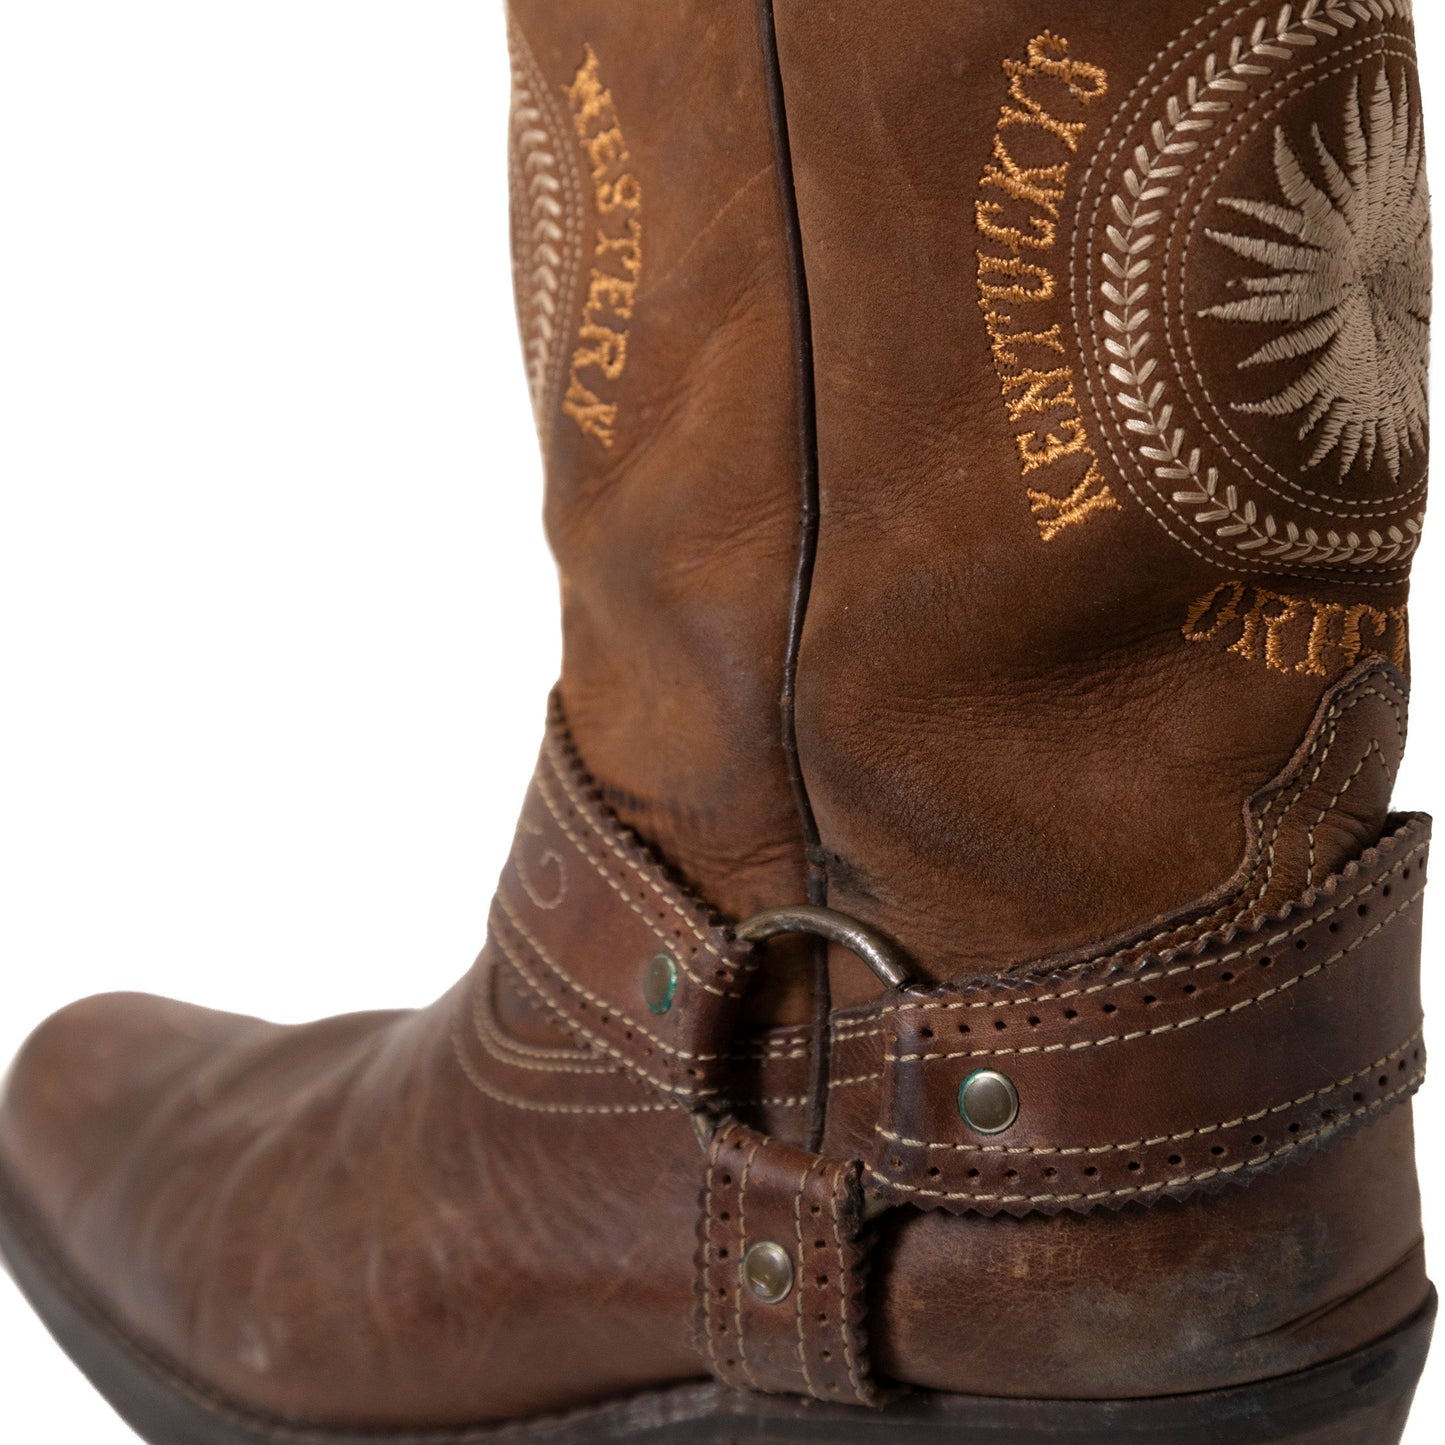 Kentucky's Leather Cowboy Boots